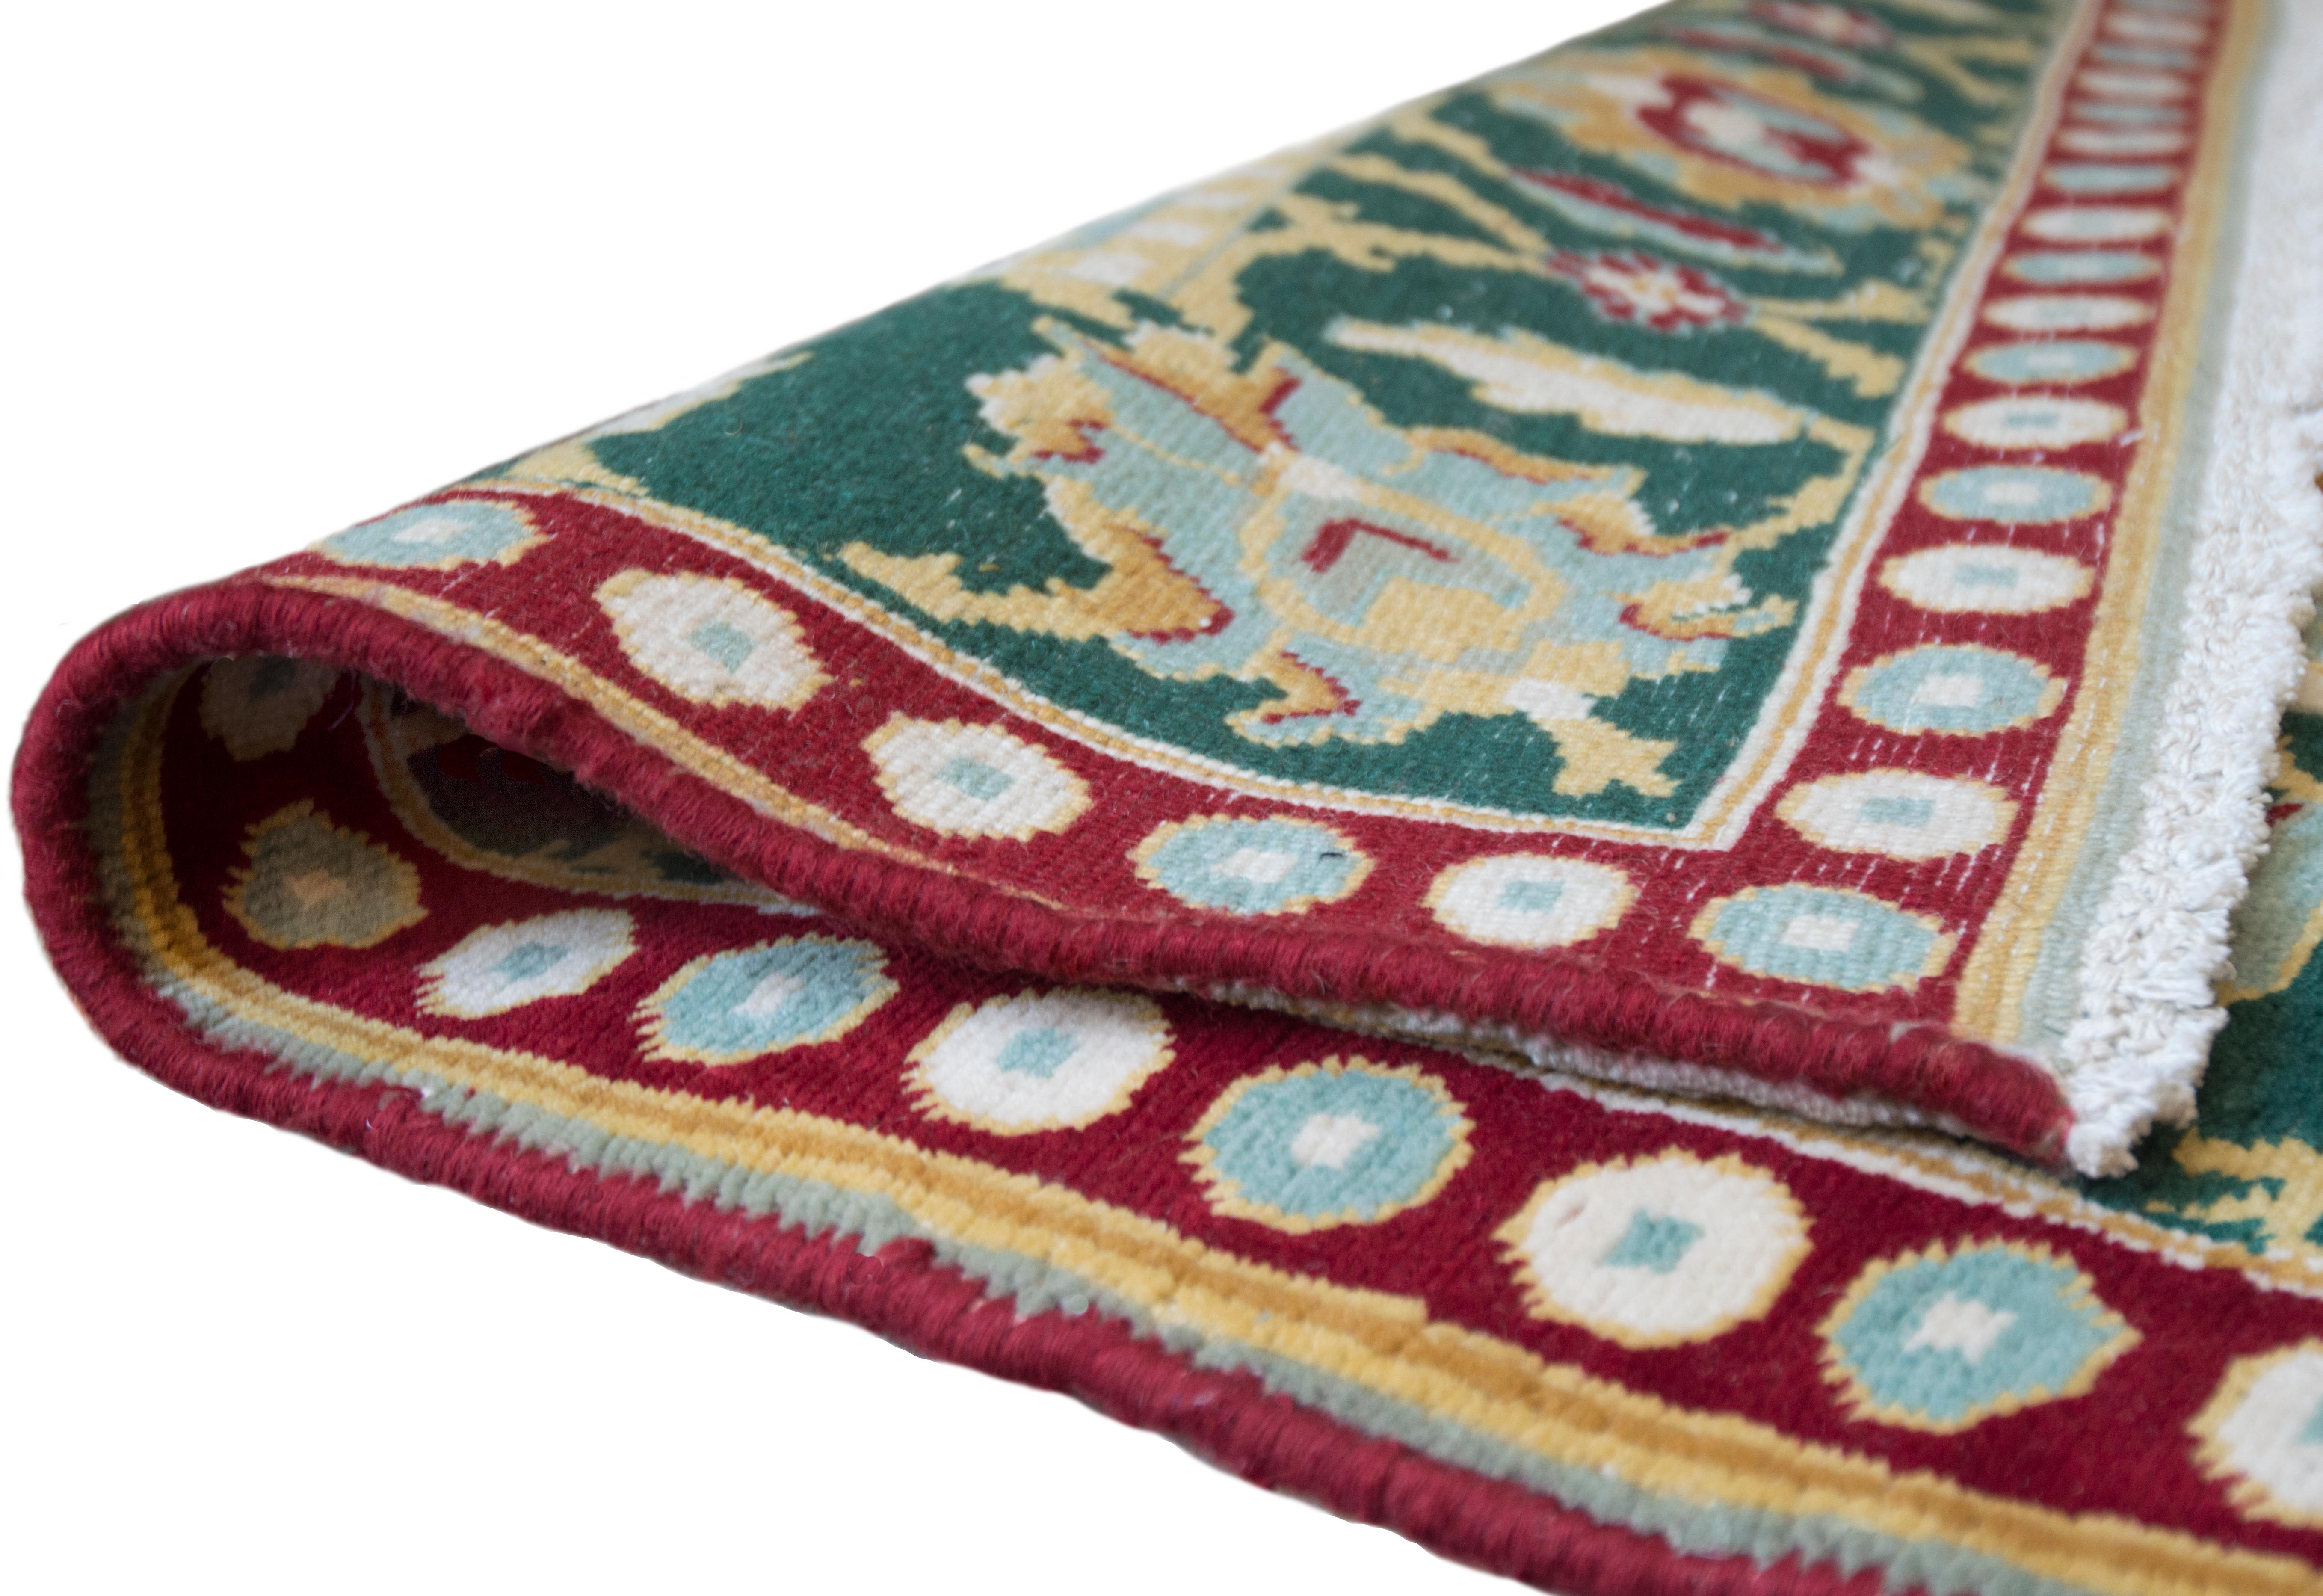 Woven very skillfully in Kashmir this beautiful Agra-inspired features a brilliant rich coloration and an amazing texture. 100% natural wool pile. Brand new.
   